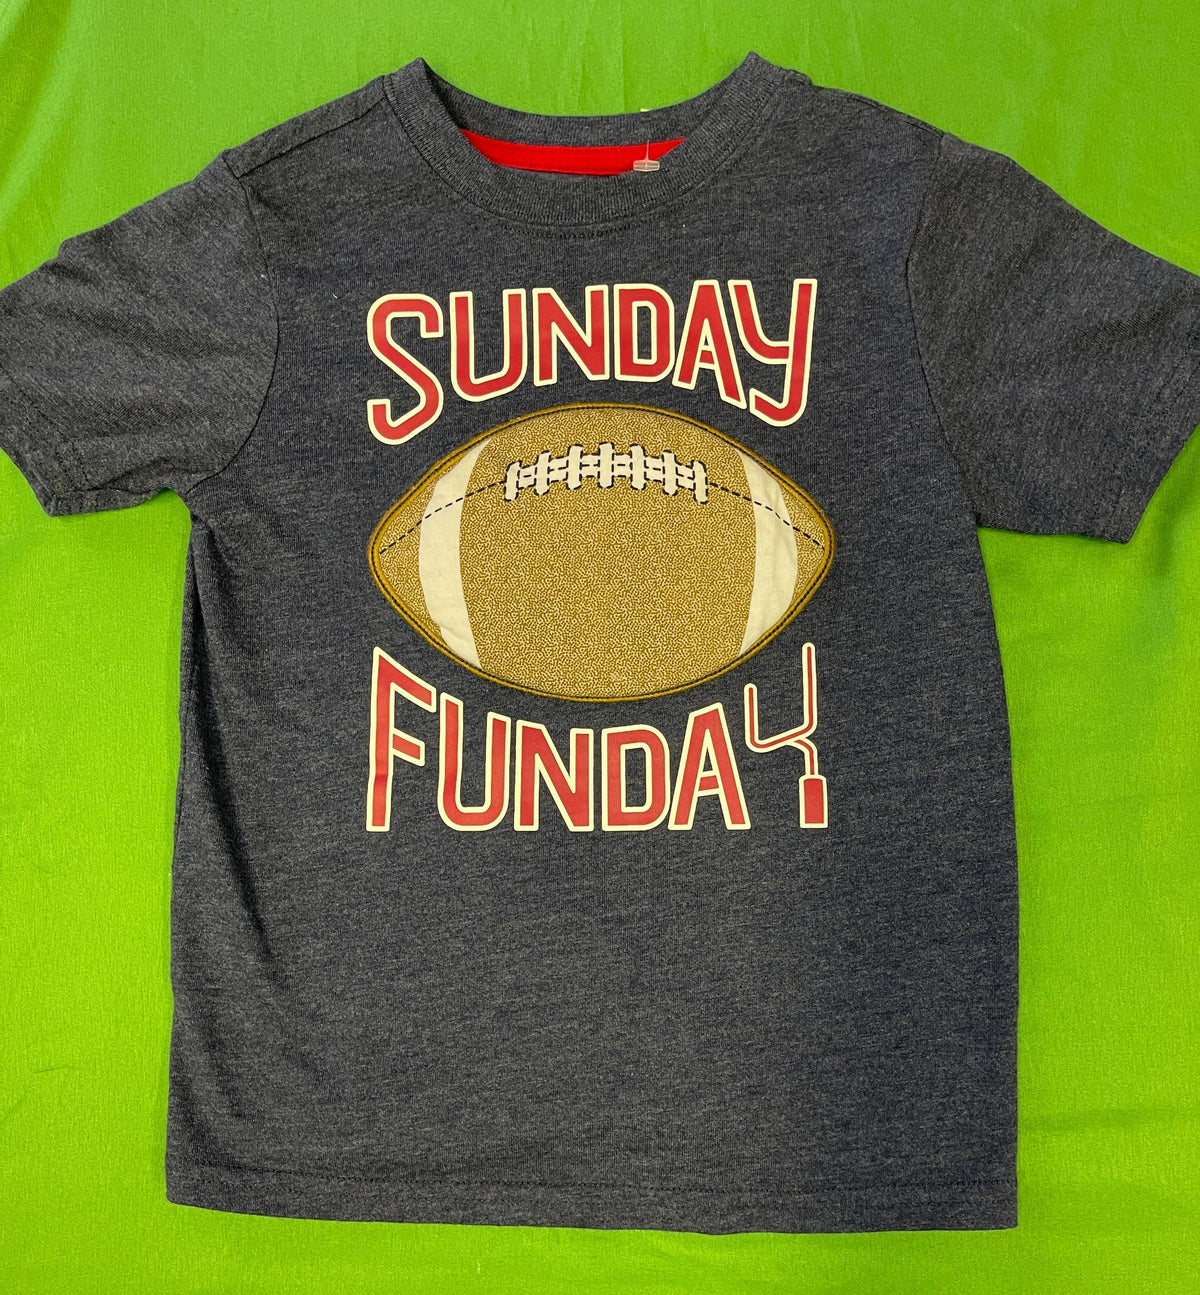 American Football "Sunday Funday" 3D T-Shirt Youth X-Small 4T